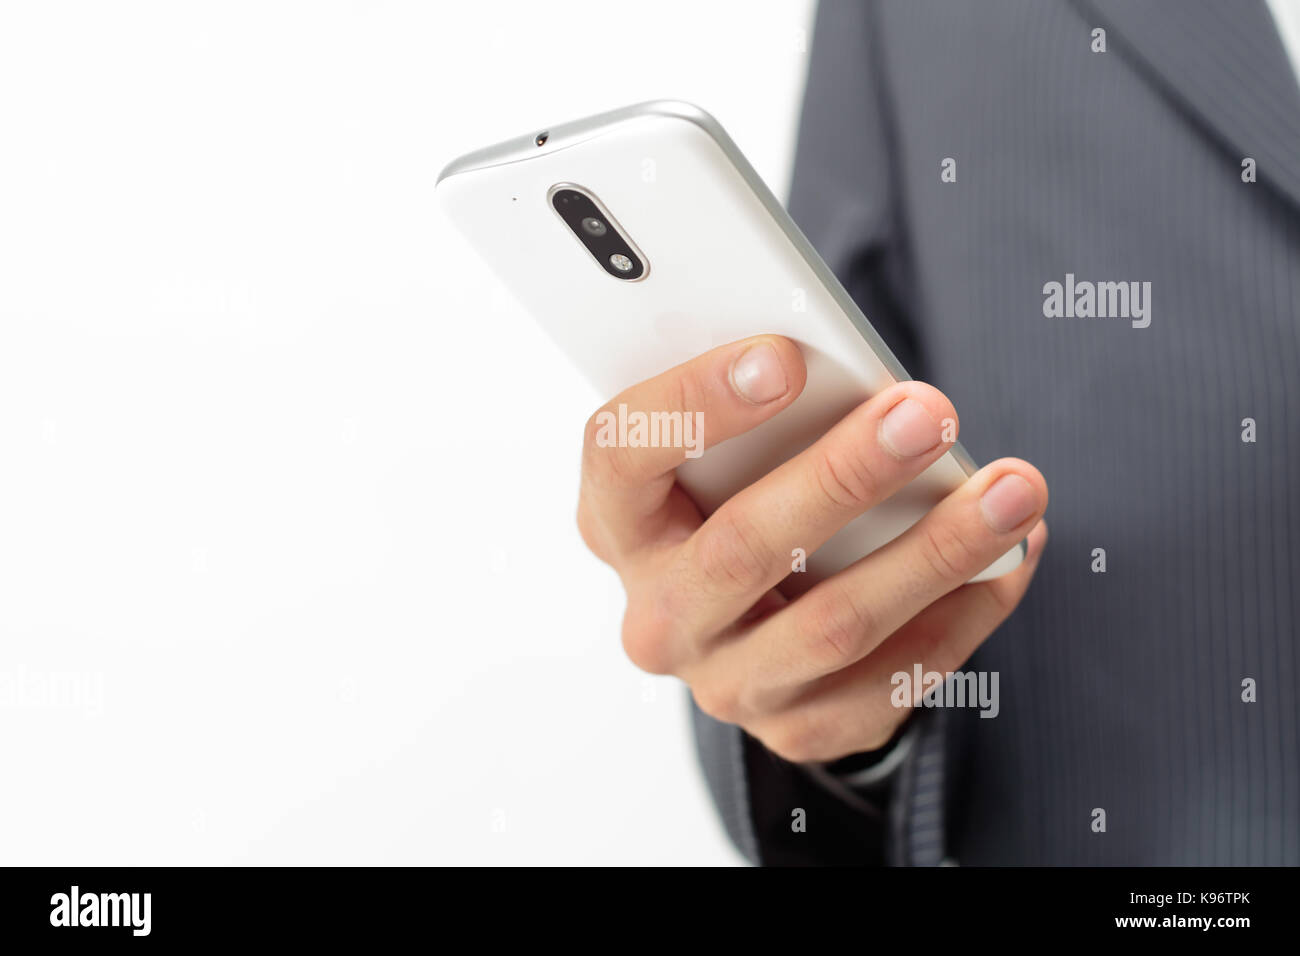 Business man with a white cell phone in his hand. Background white, gray striped suit. Stock Photo